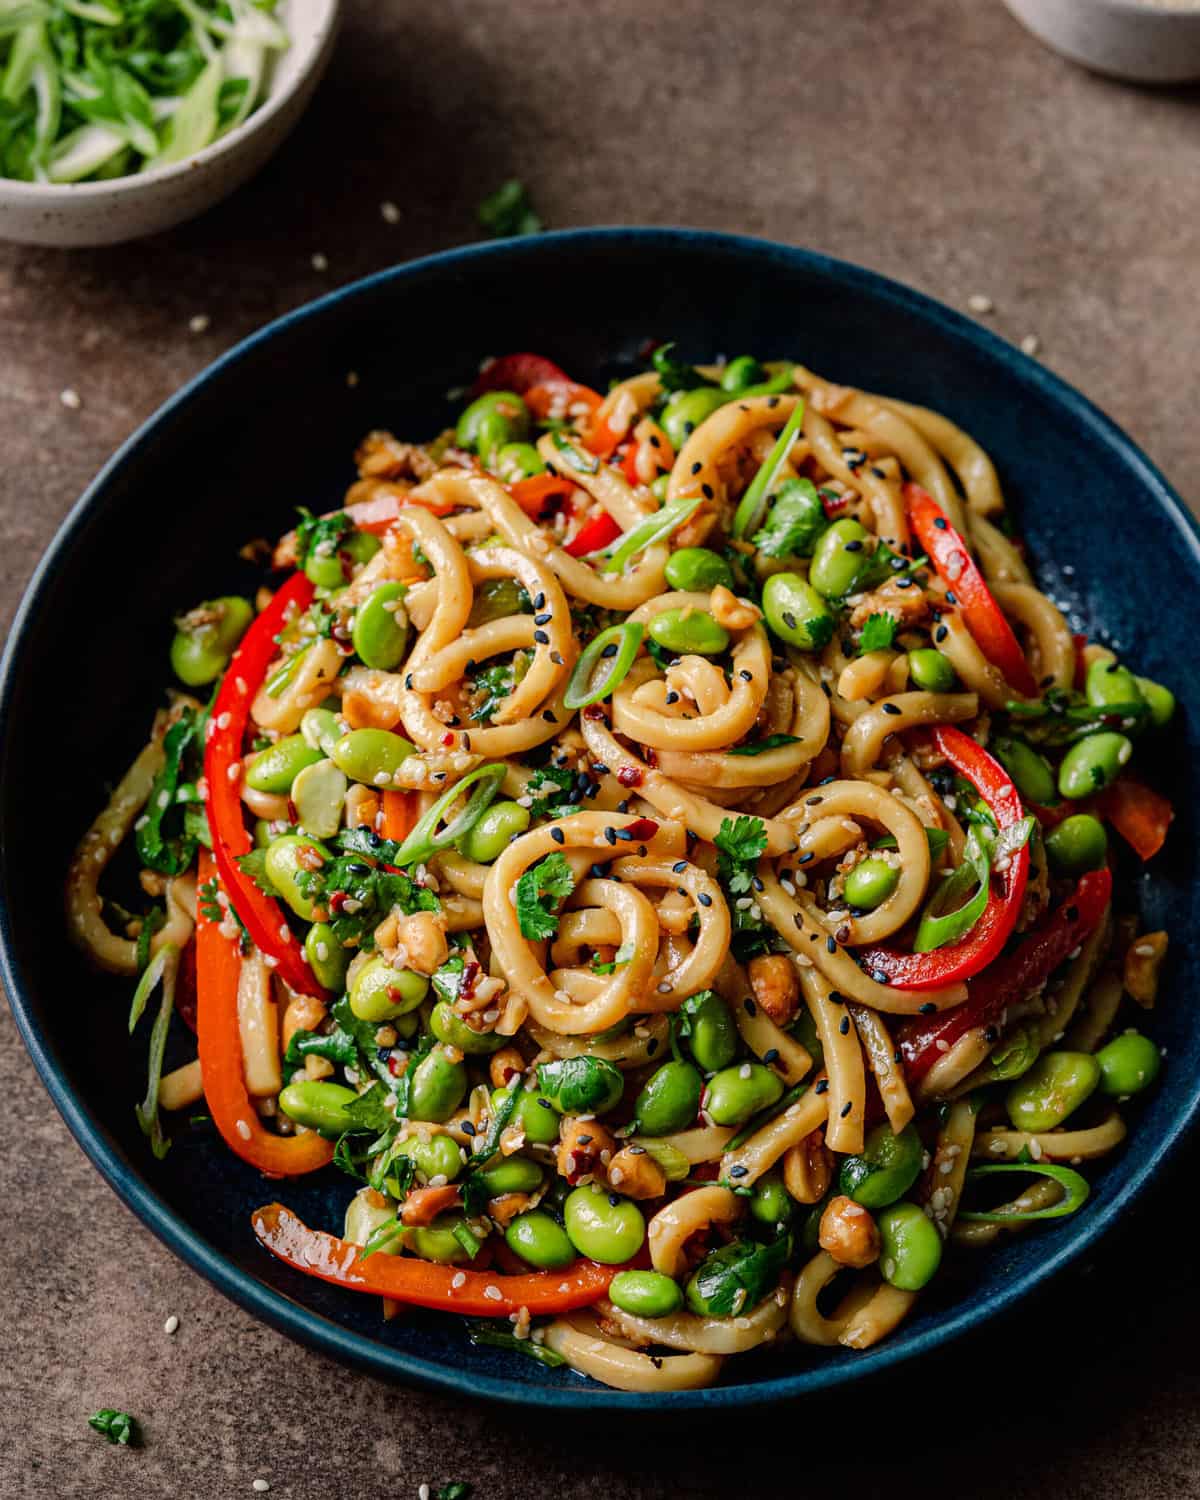 vegan noodles with chili garlic sauce and bell peppers in navy blue bowl on brown backdrop, with bowl of scallions